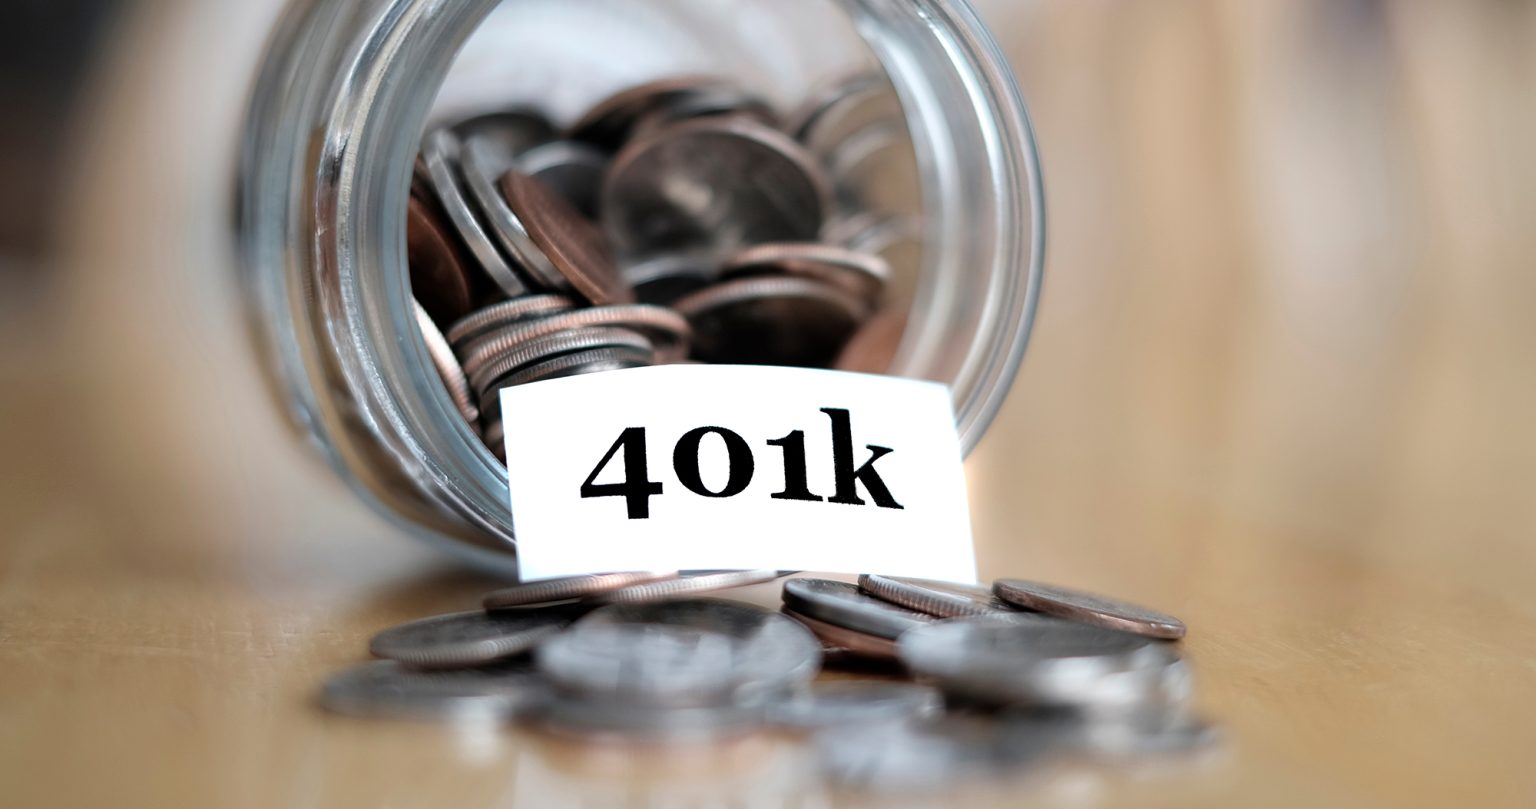 Coins in a jar with a note that says 401k